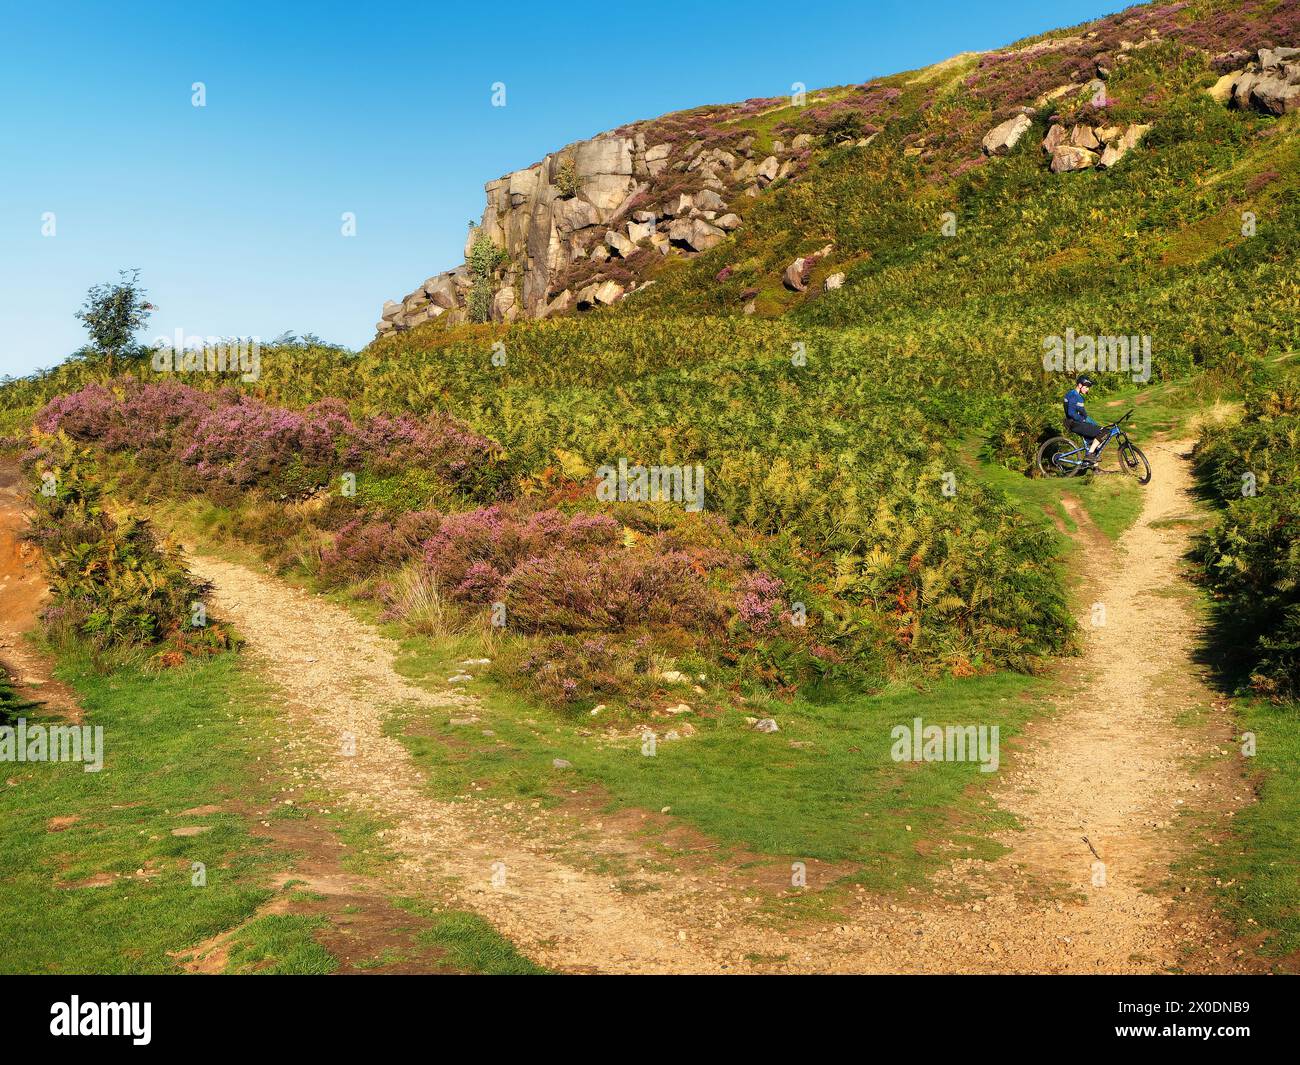 UK, West Yorkshire, Ilkley, Ilkley Moor, Footpaths through Rocky Valley and Ilkley Crags. Stock Photo